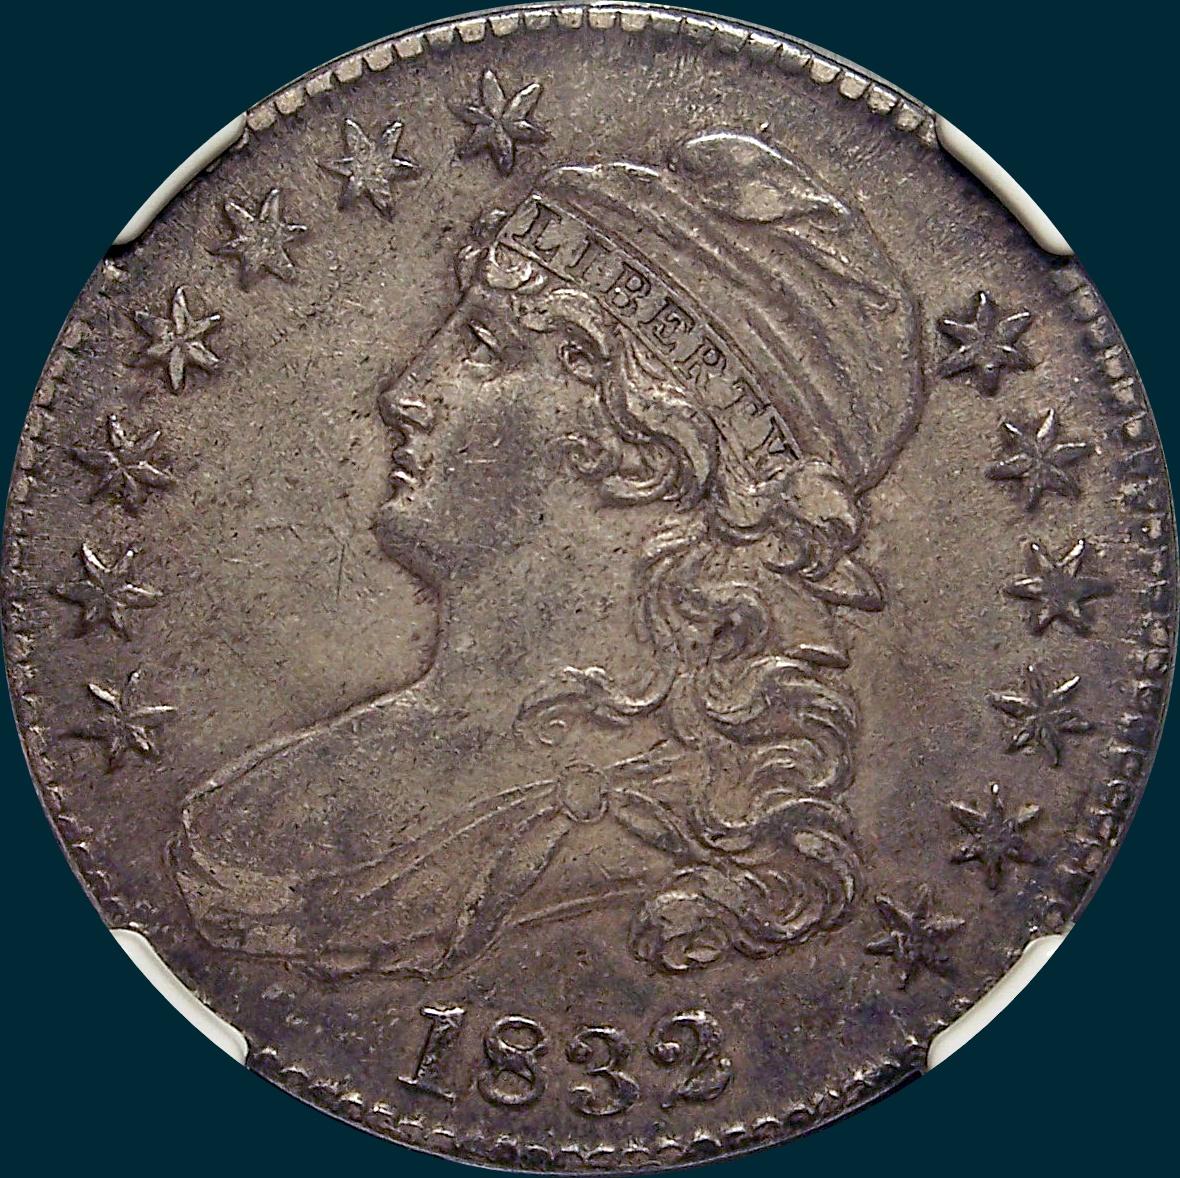 1832, O-110, Small Letters, Capped Bust, Half Dollar